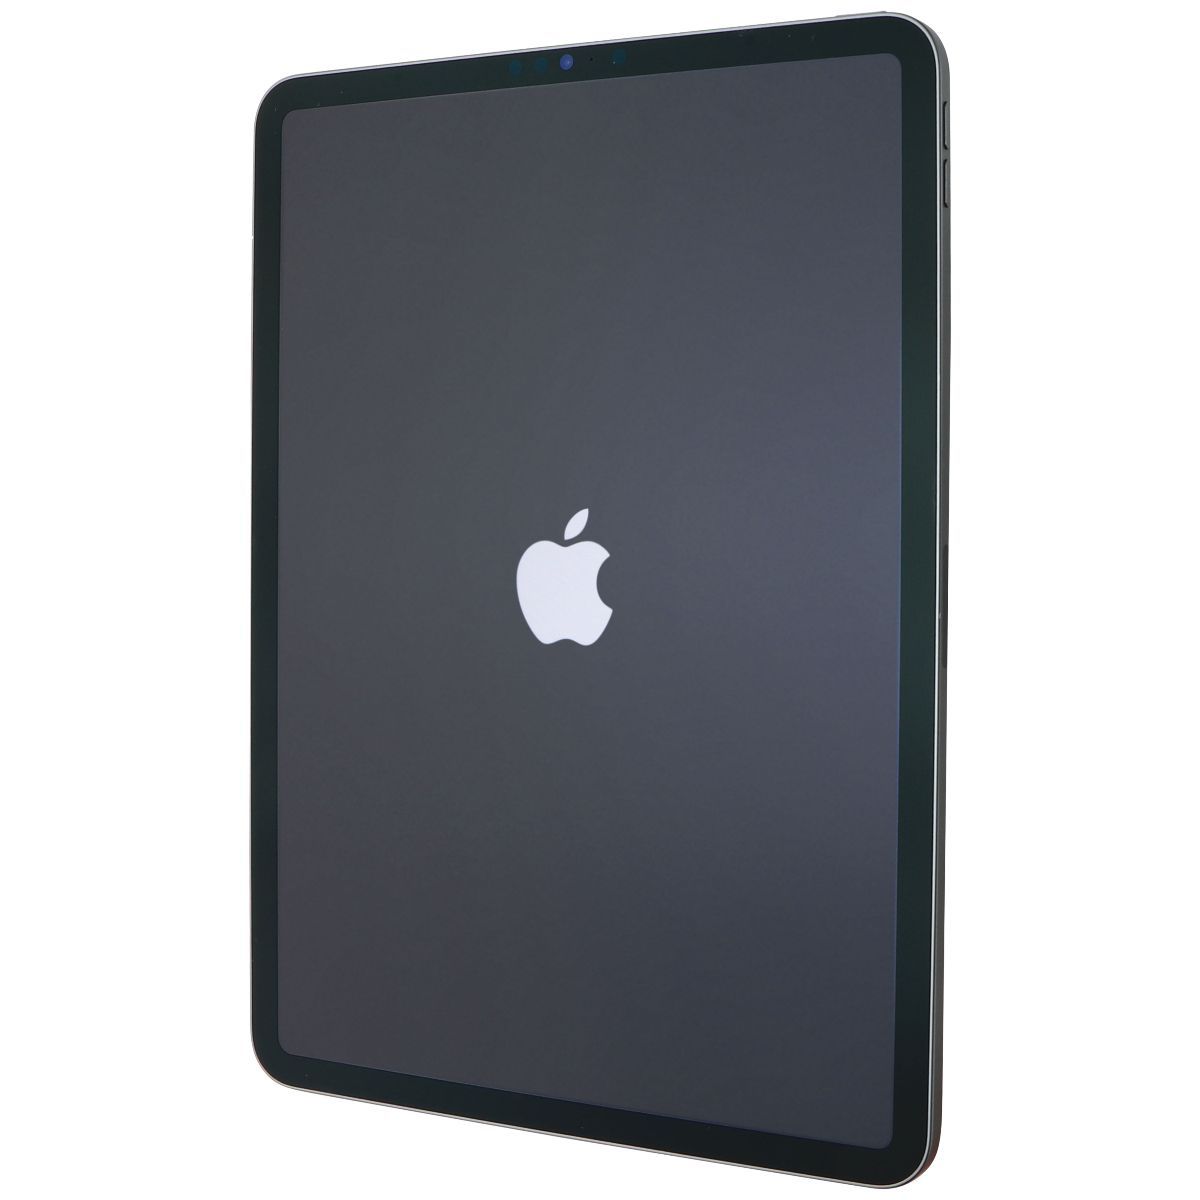 Apple iPad Pro 11-inch (3rd gen) Tablet (A2301) Unlocked - 256GB / Space Gray iPads, Tablets & eBook Readers Apple    - Simple Cell Bulk Wholesale Pricing - USA Seller